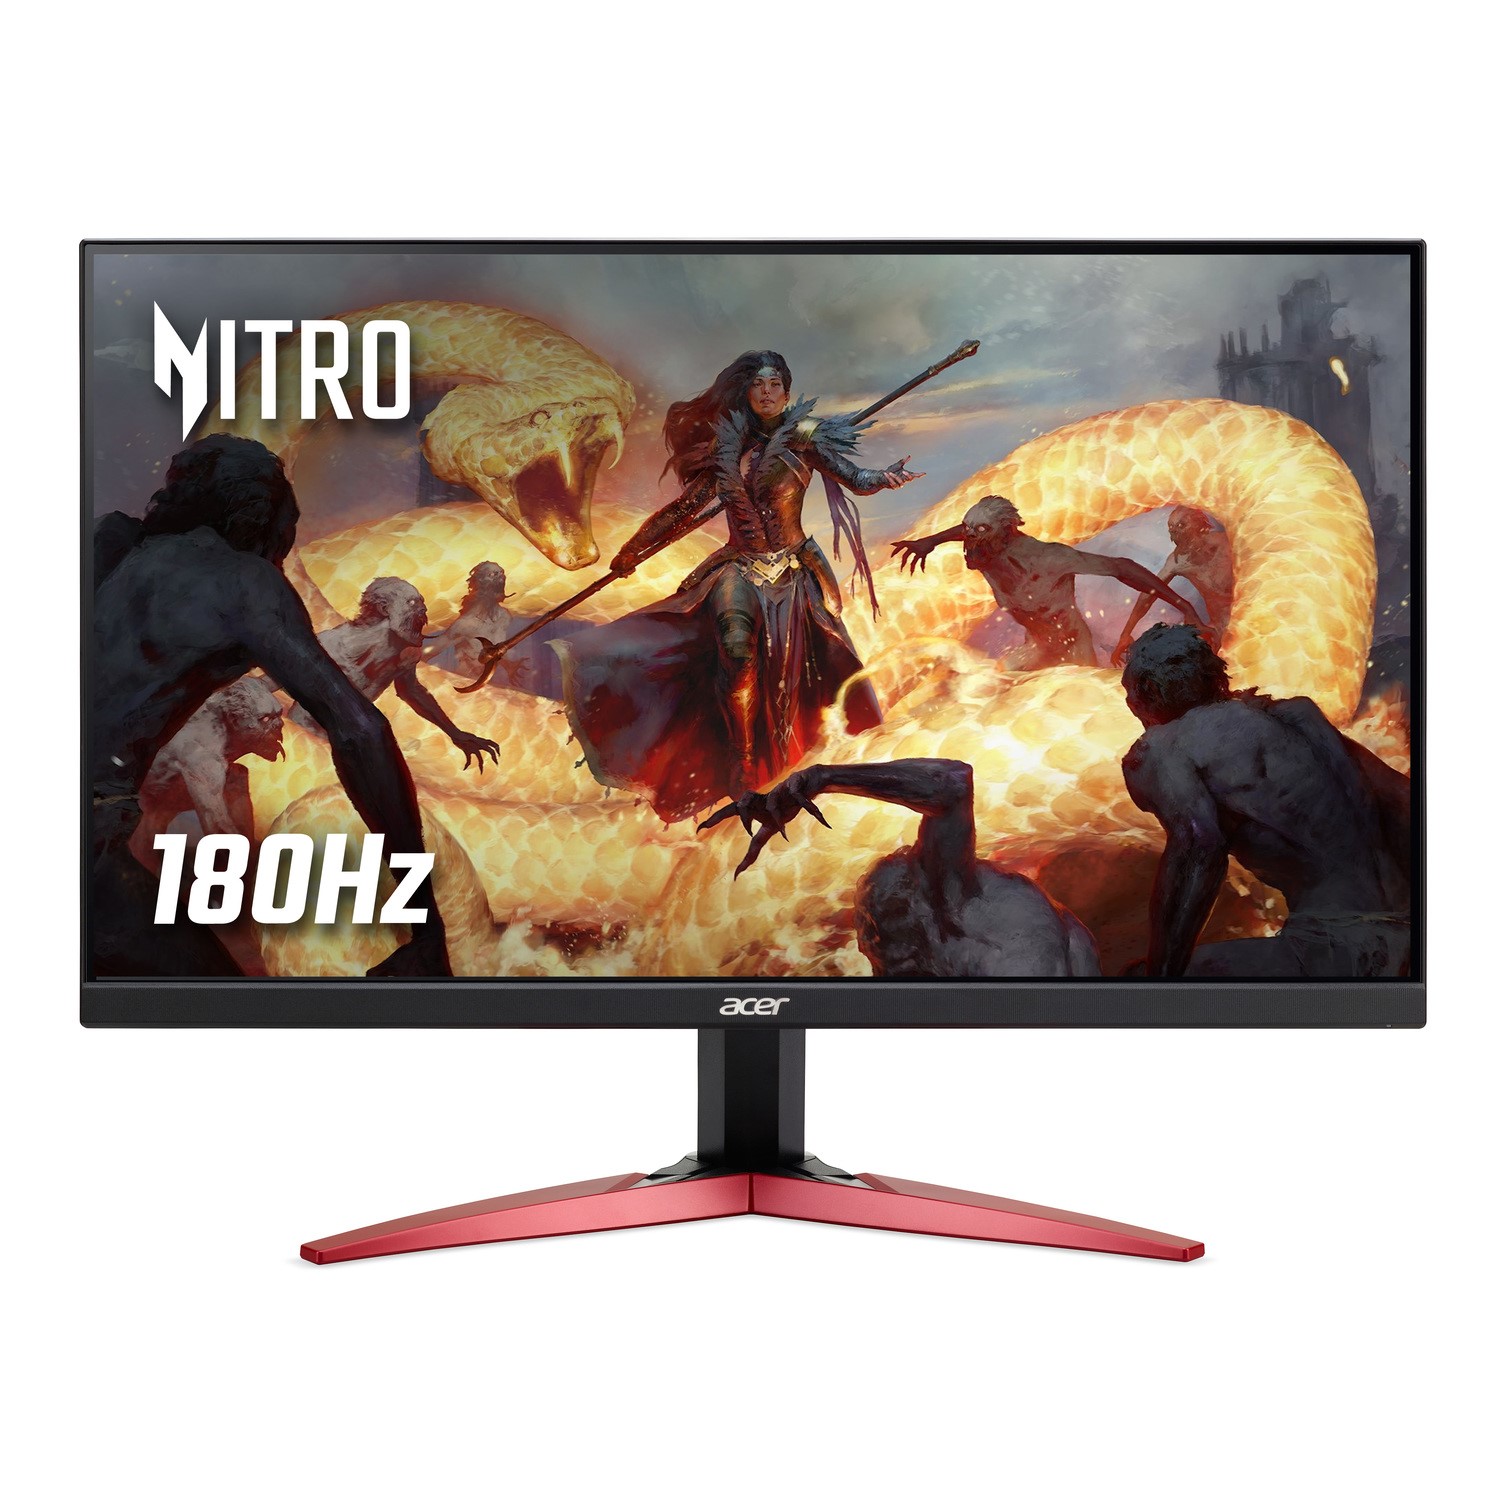 Photos - Other for Computer Acer Nitro KG271M3 27" Full HD IPS 180Hz Gaming Monitor UM.HX1EE.307 